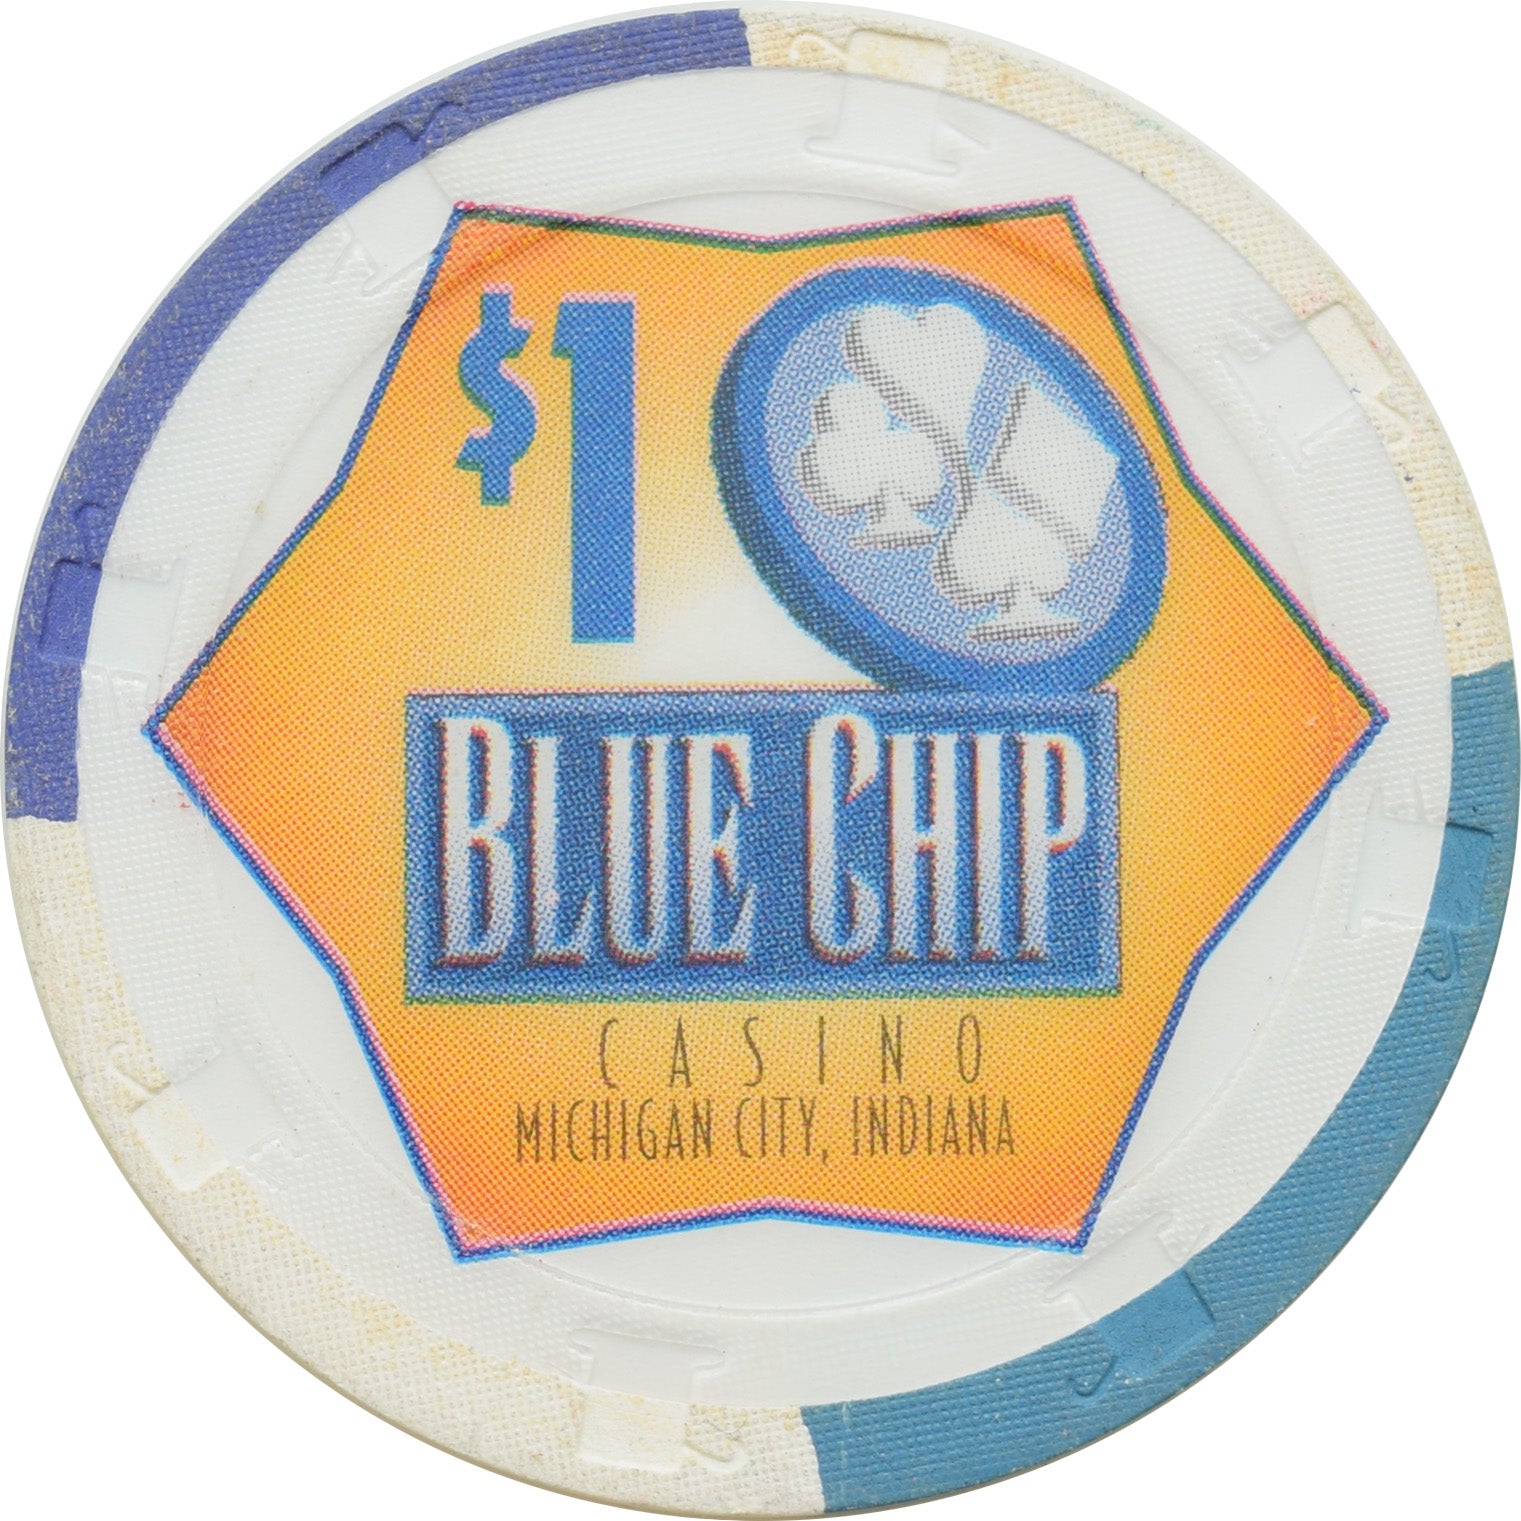 where is blue chip casino